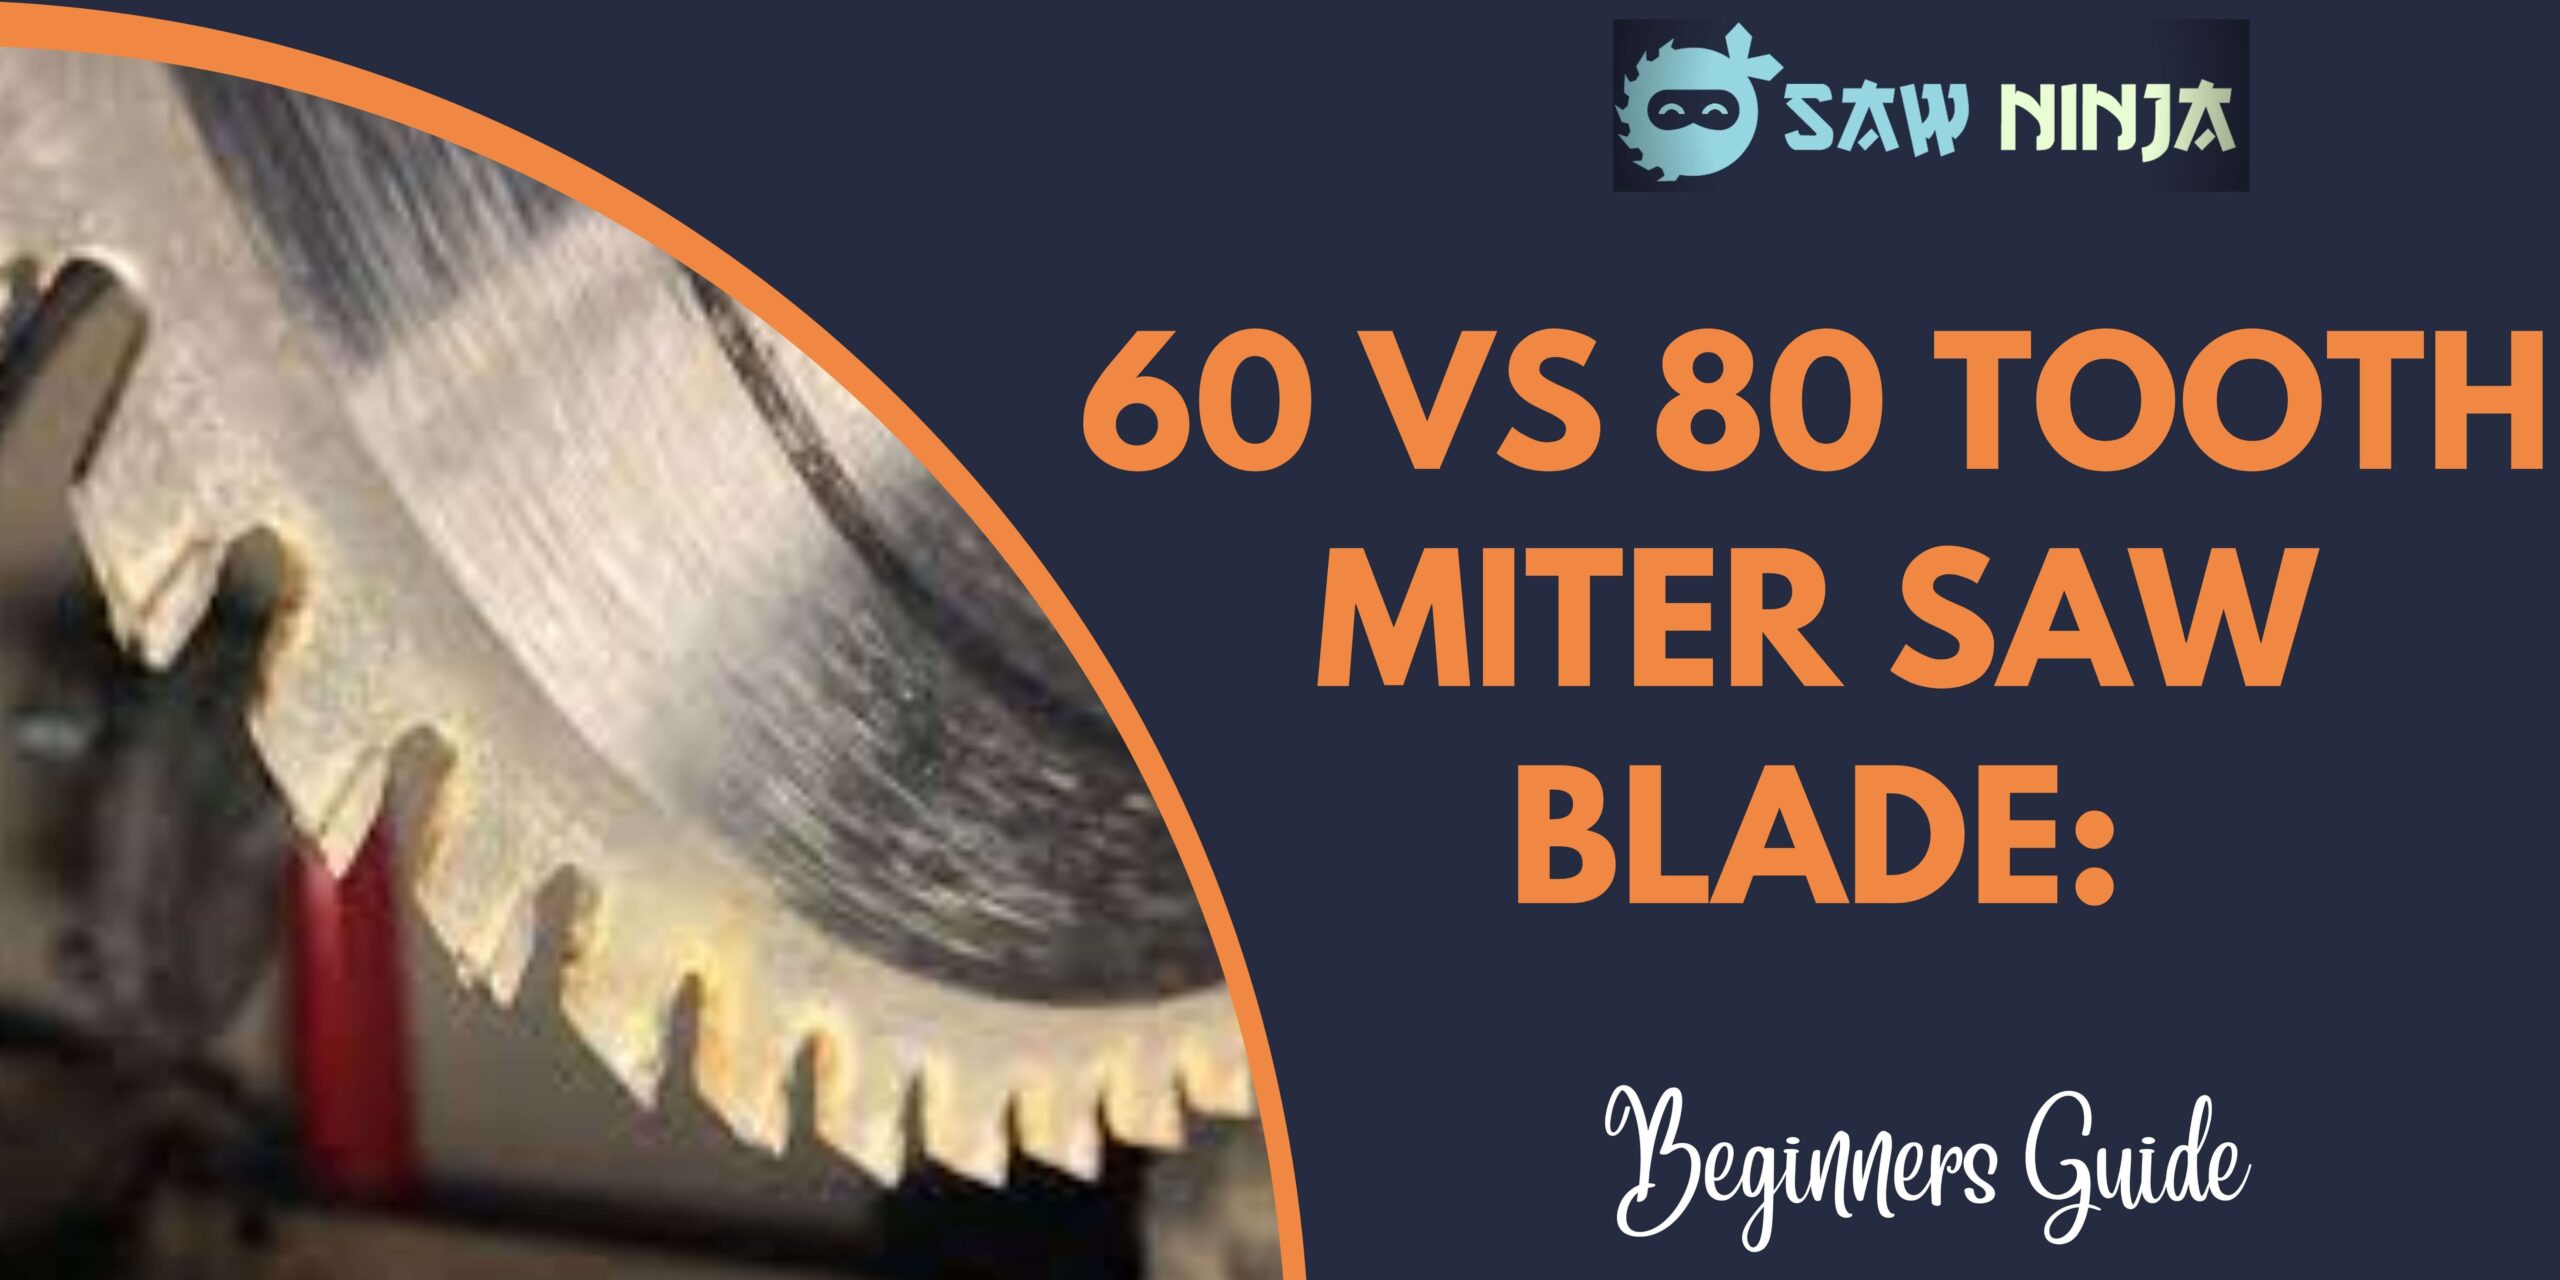 60 Vs 80 Tooth Miter Saw Blade